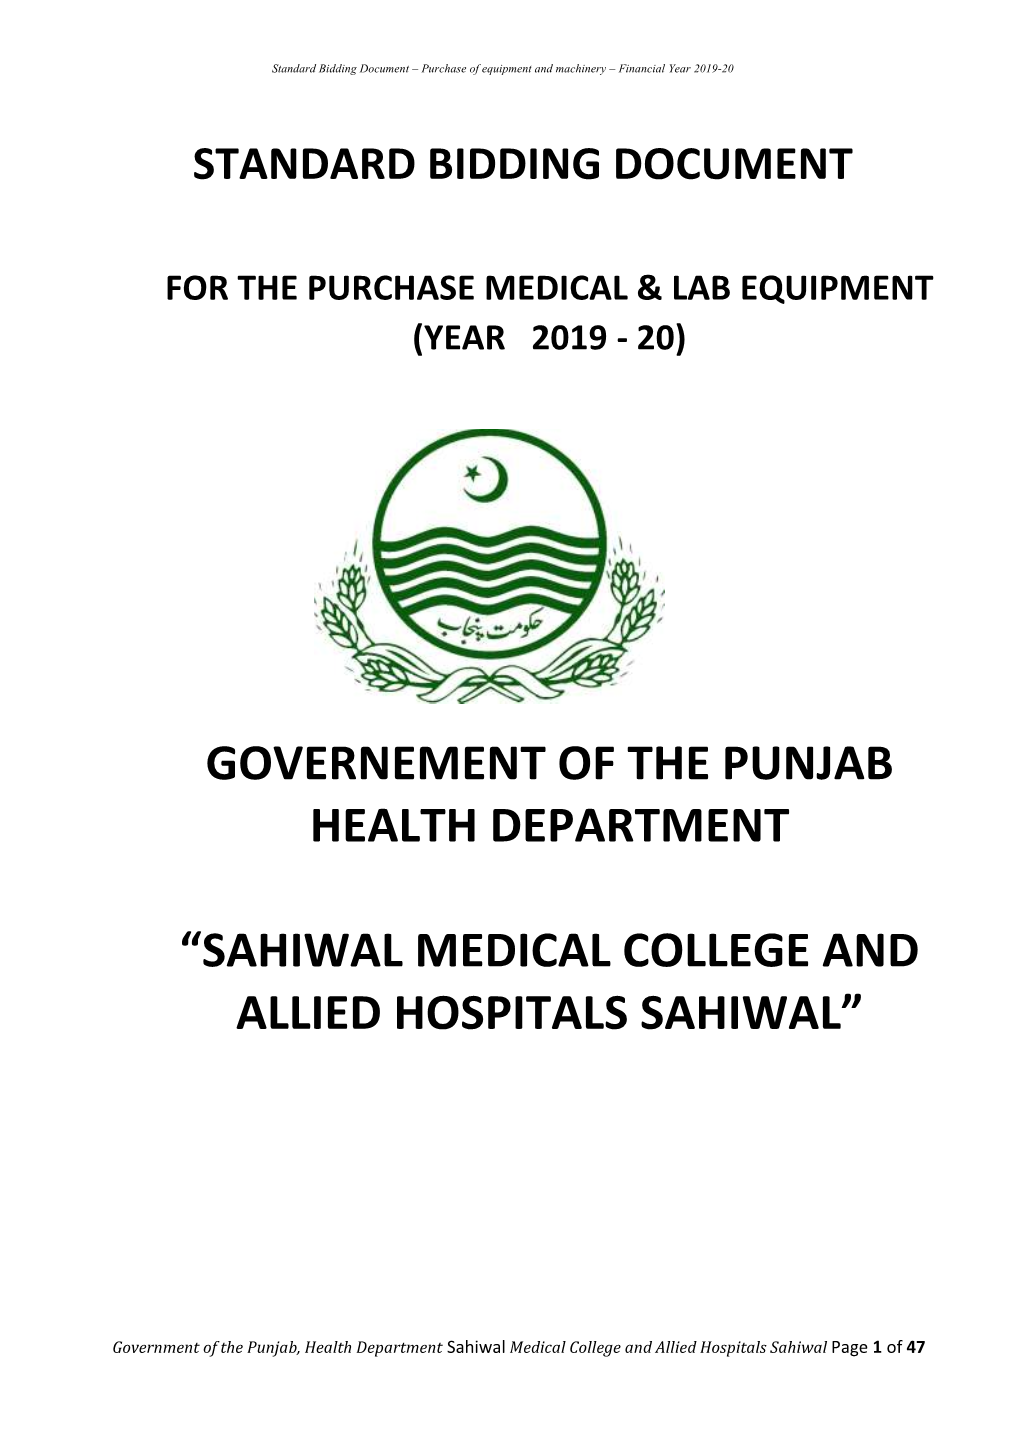 Sahiwal Medical College and Allied Hospitals Sahiwal Page 1 of 47